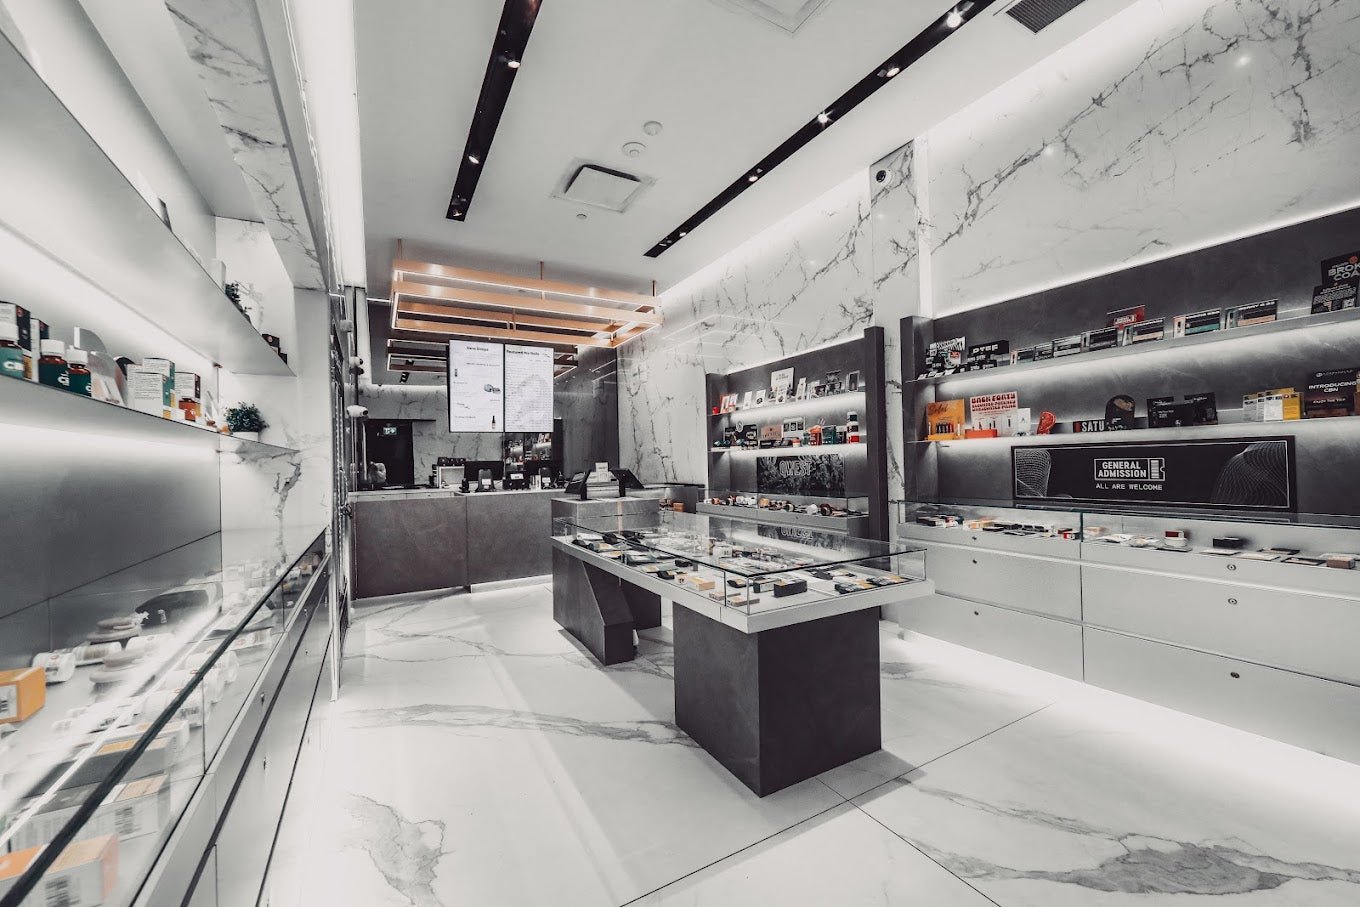 Indulge in unparalleled quality and service at Ashario Cannabis, conveniently located near Thornhill. Our store offers a premium selection of top-tier cannabis products, including high-grade flower, potent concentrates, and delectable edibles.